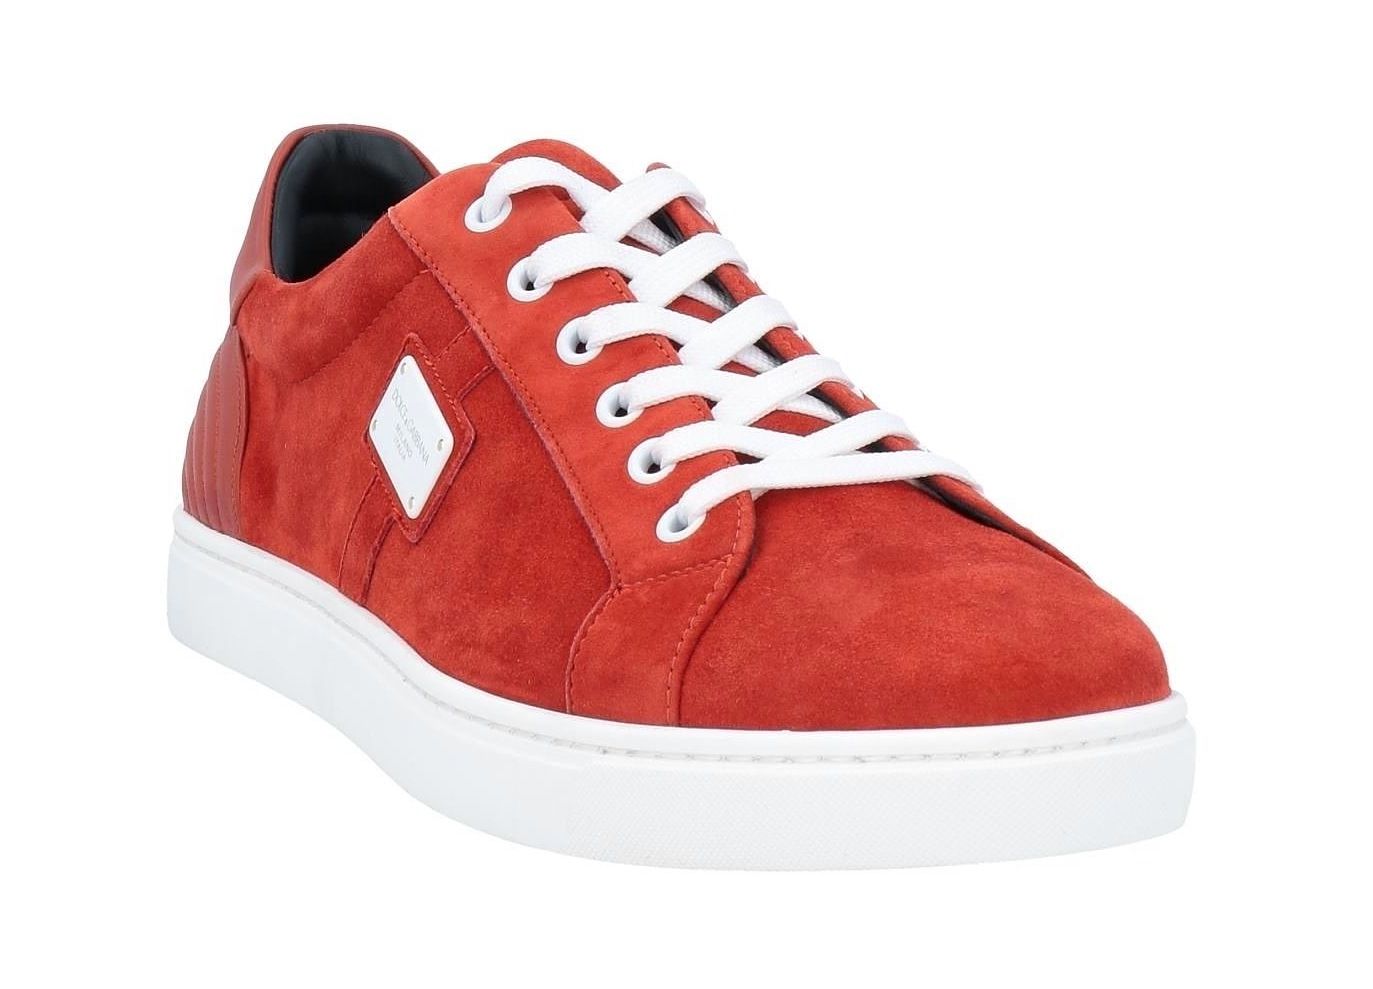 Radiant Red Leather Sneakers